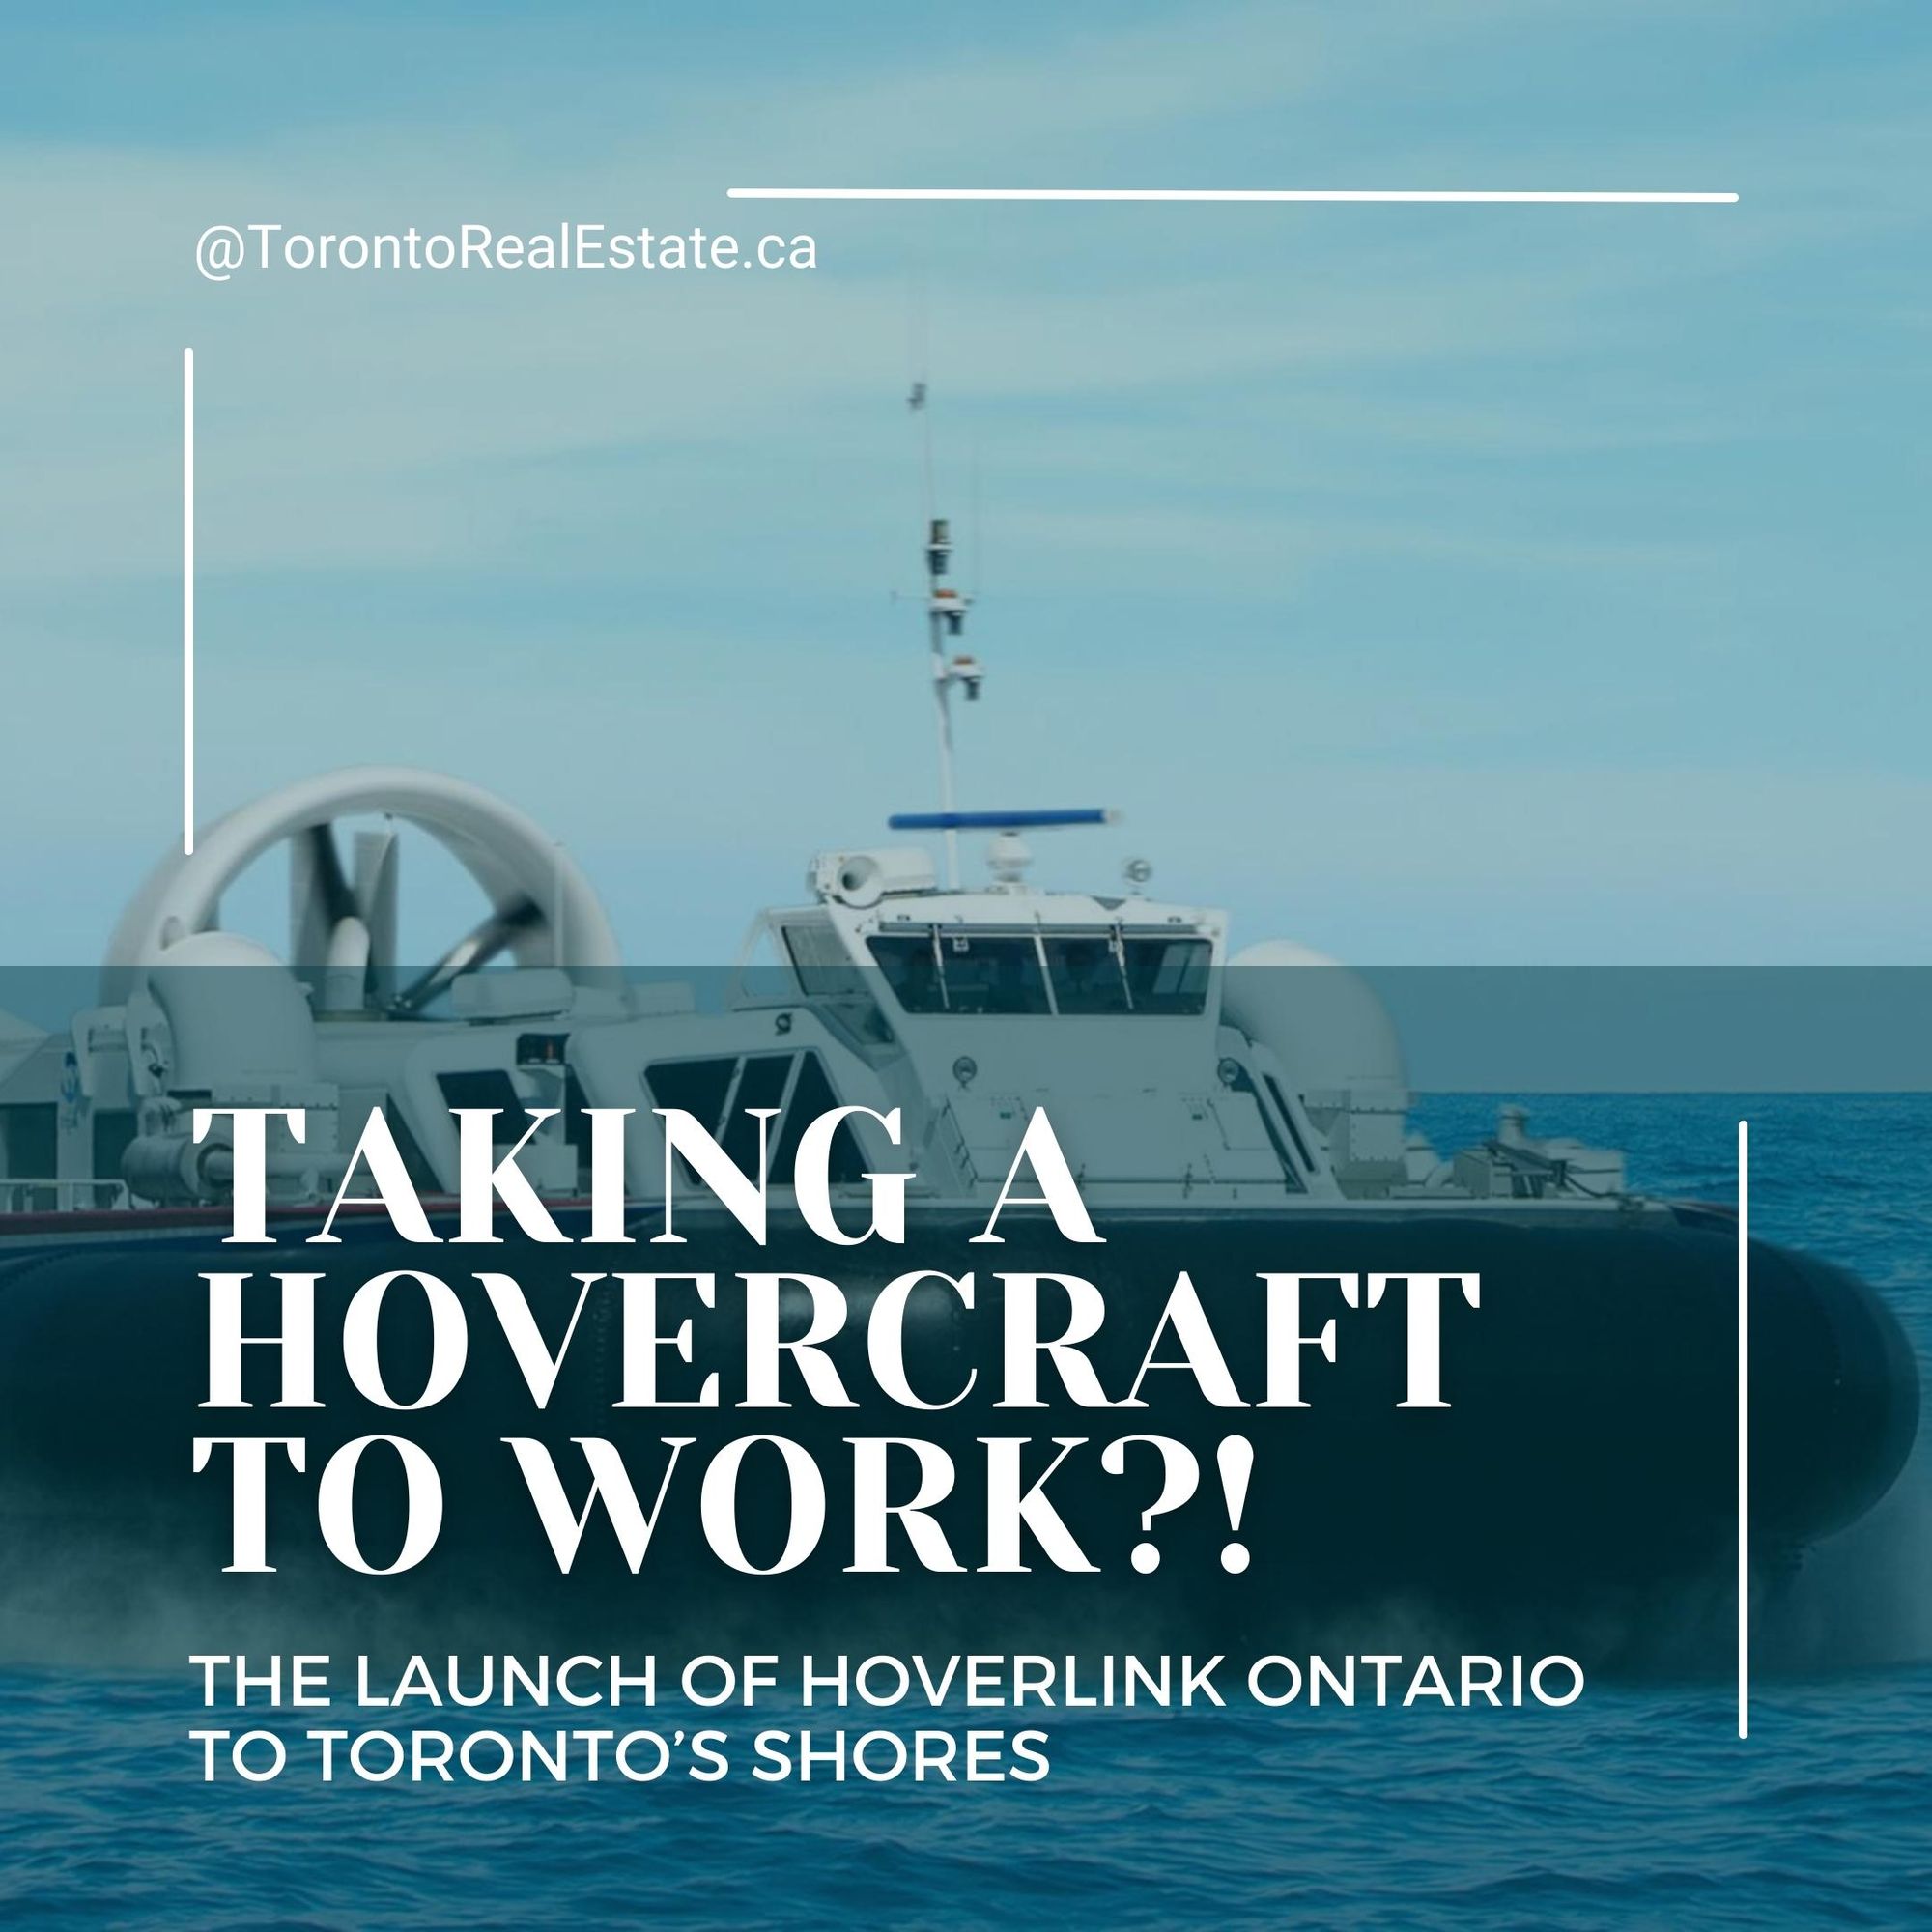 Taking a hovercraft to work?! The launch of Hoverlink Ontario to Toronto’s shores